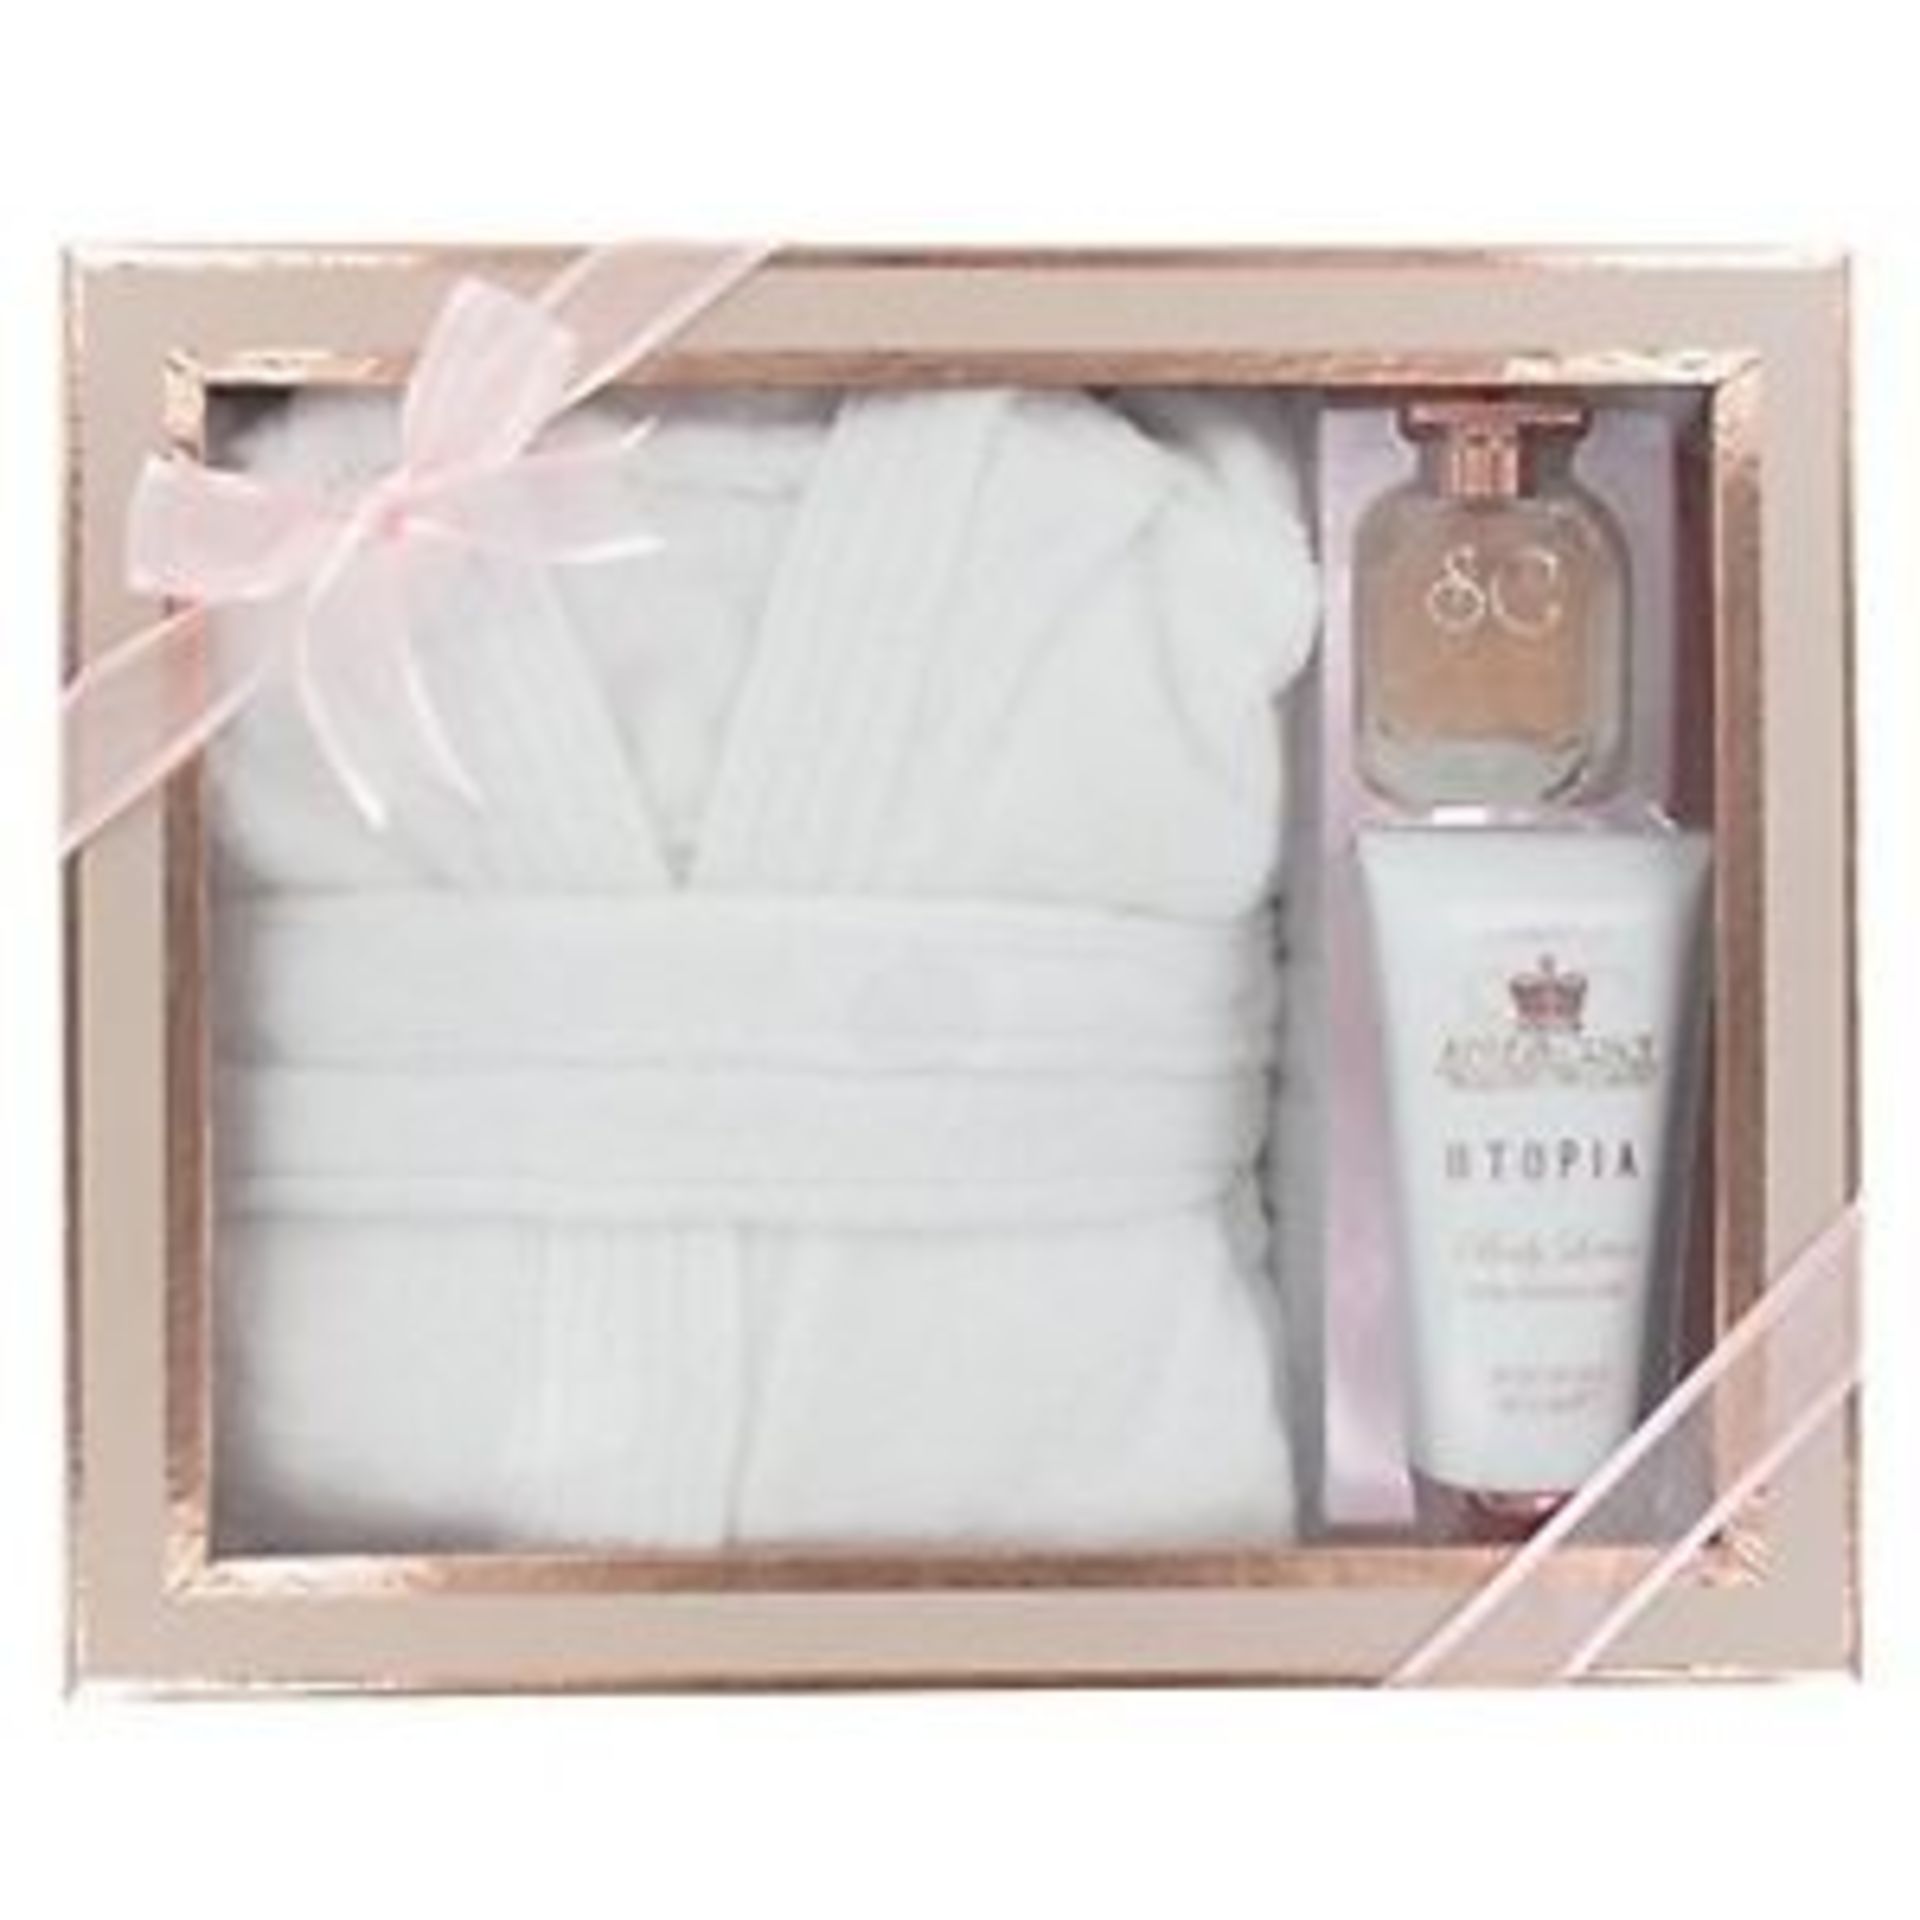 V Brand New Style and Grace Utopia Extravagant Robe Gift Set X 2 YOUR BID PRICE TO BE MULTIPLIED